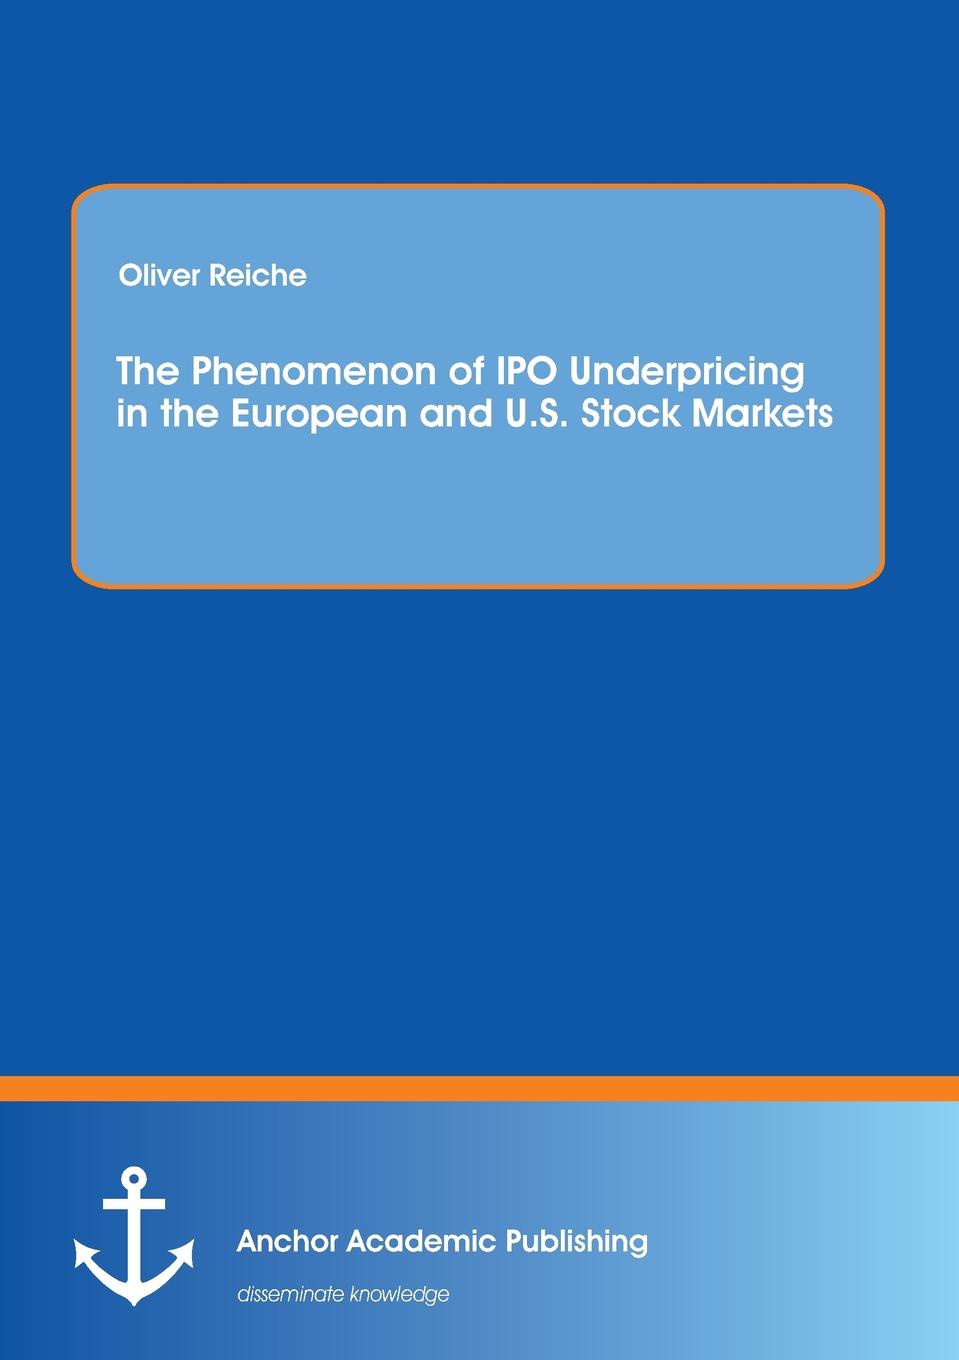 The Phenomenon of IPO Underpricing in the European and U.S. Stock Markets